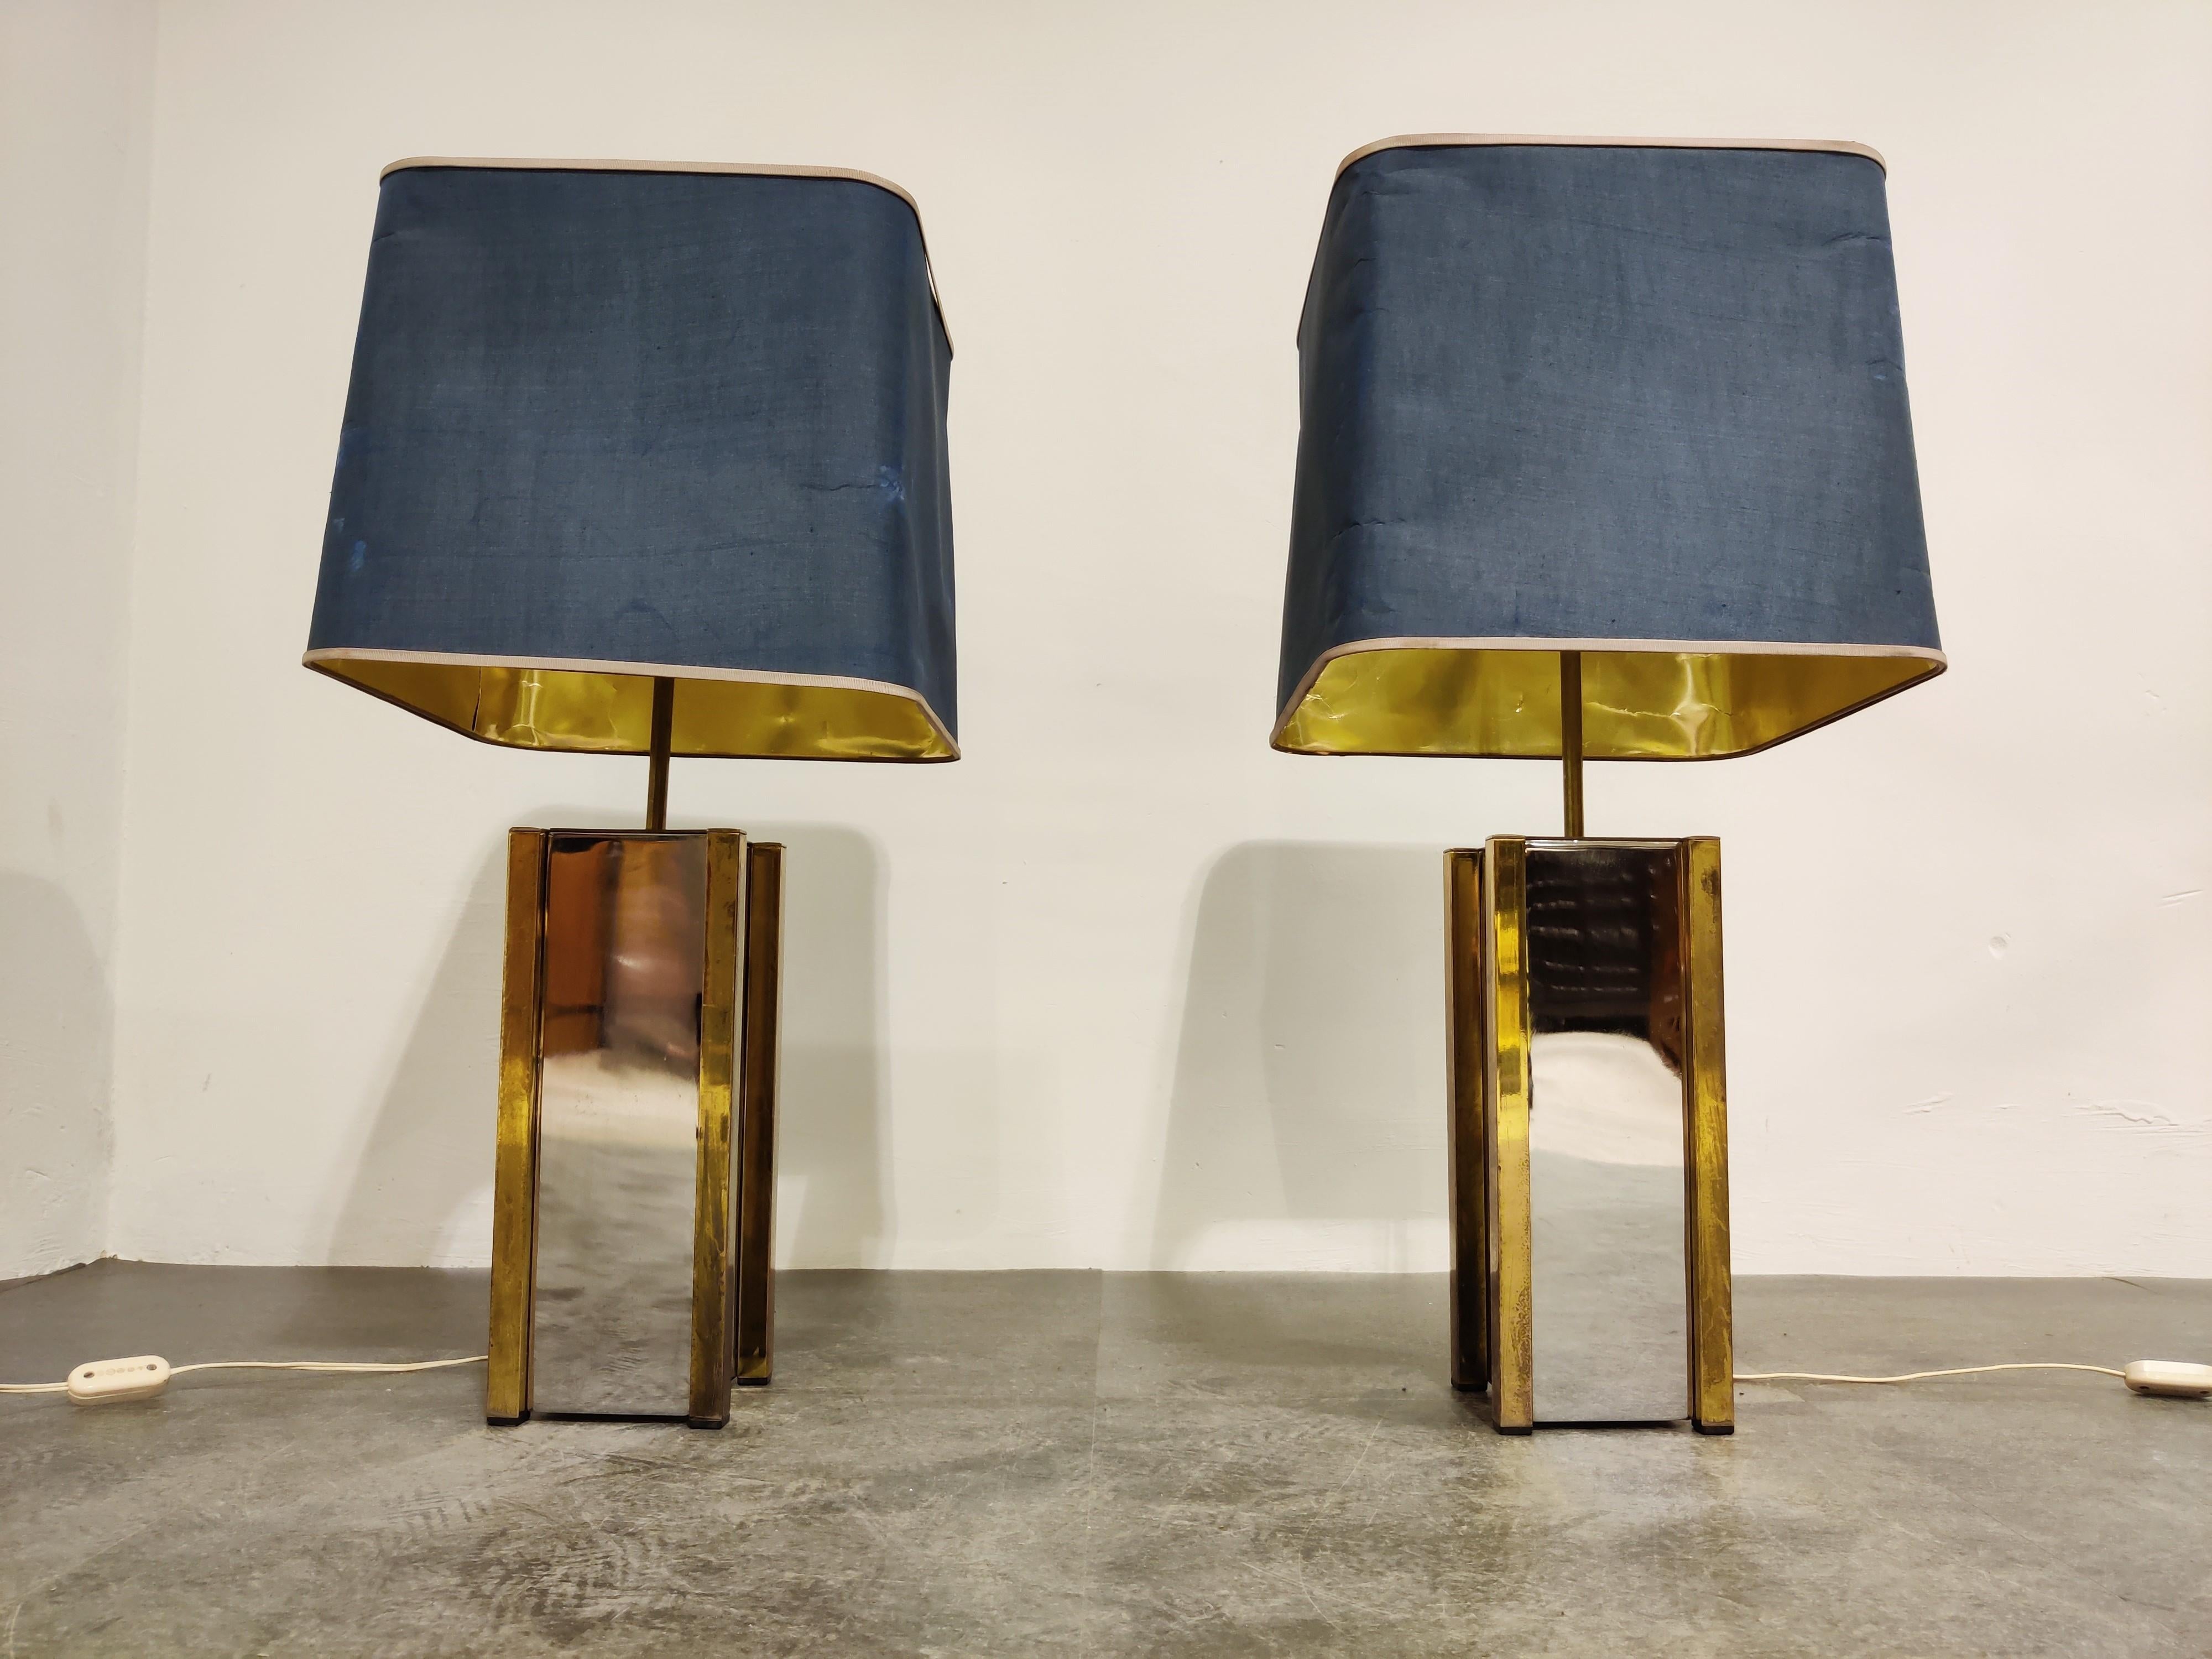 Pair of large brass and chrome table lamps by Belgochrom. 

Seventies glamour.

Come with their original slightly battered lamp shades.

We can supply’s custom lamp shades on demand.

The length of the rod can be adjusted.

Tested and